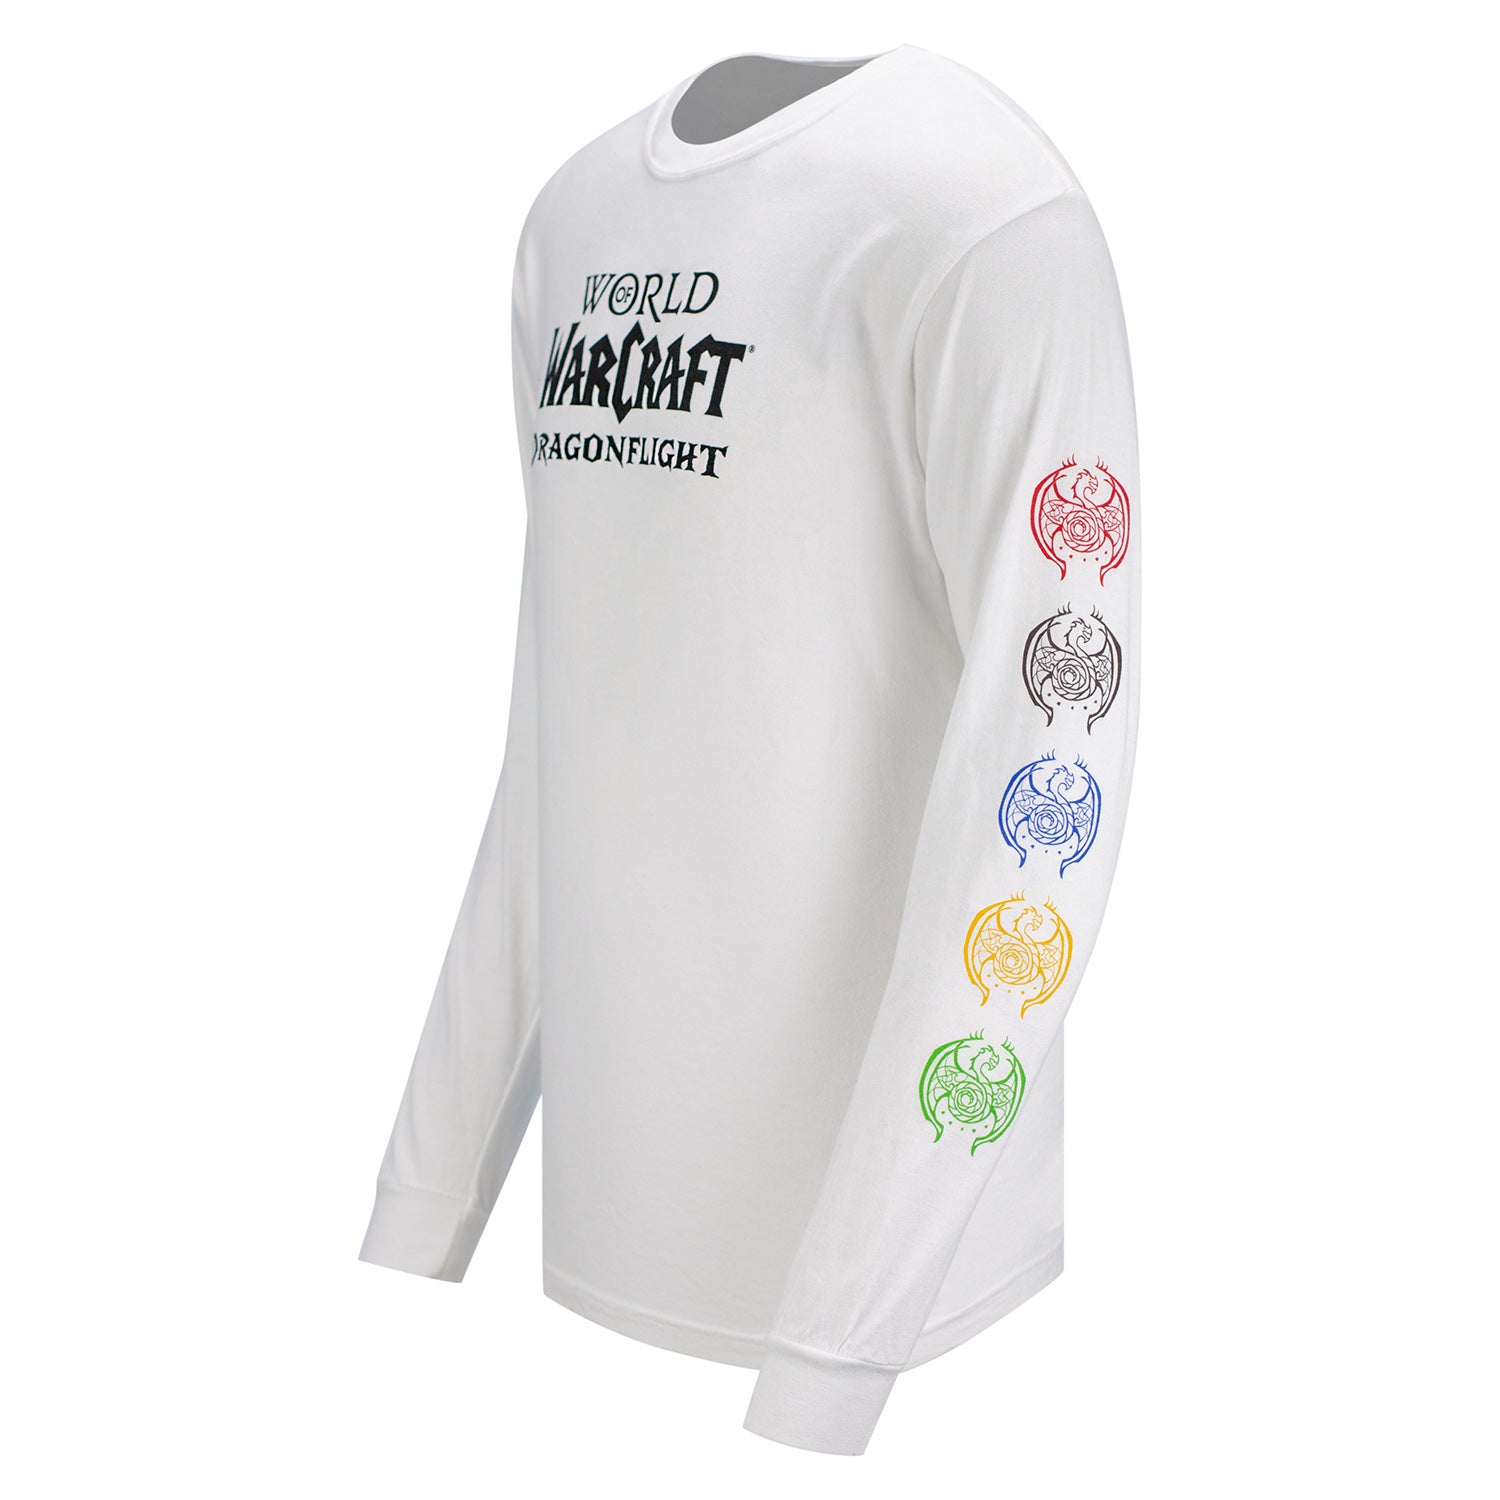 World of Warcraft Dragonflight White Long Sleeve T-Shirt - Front Left Side View